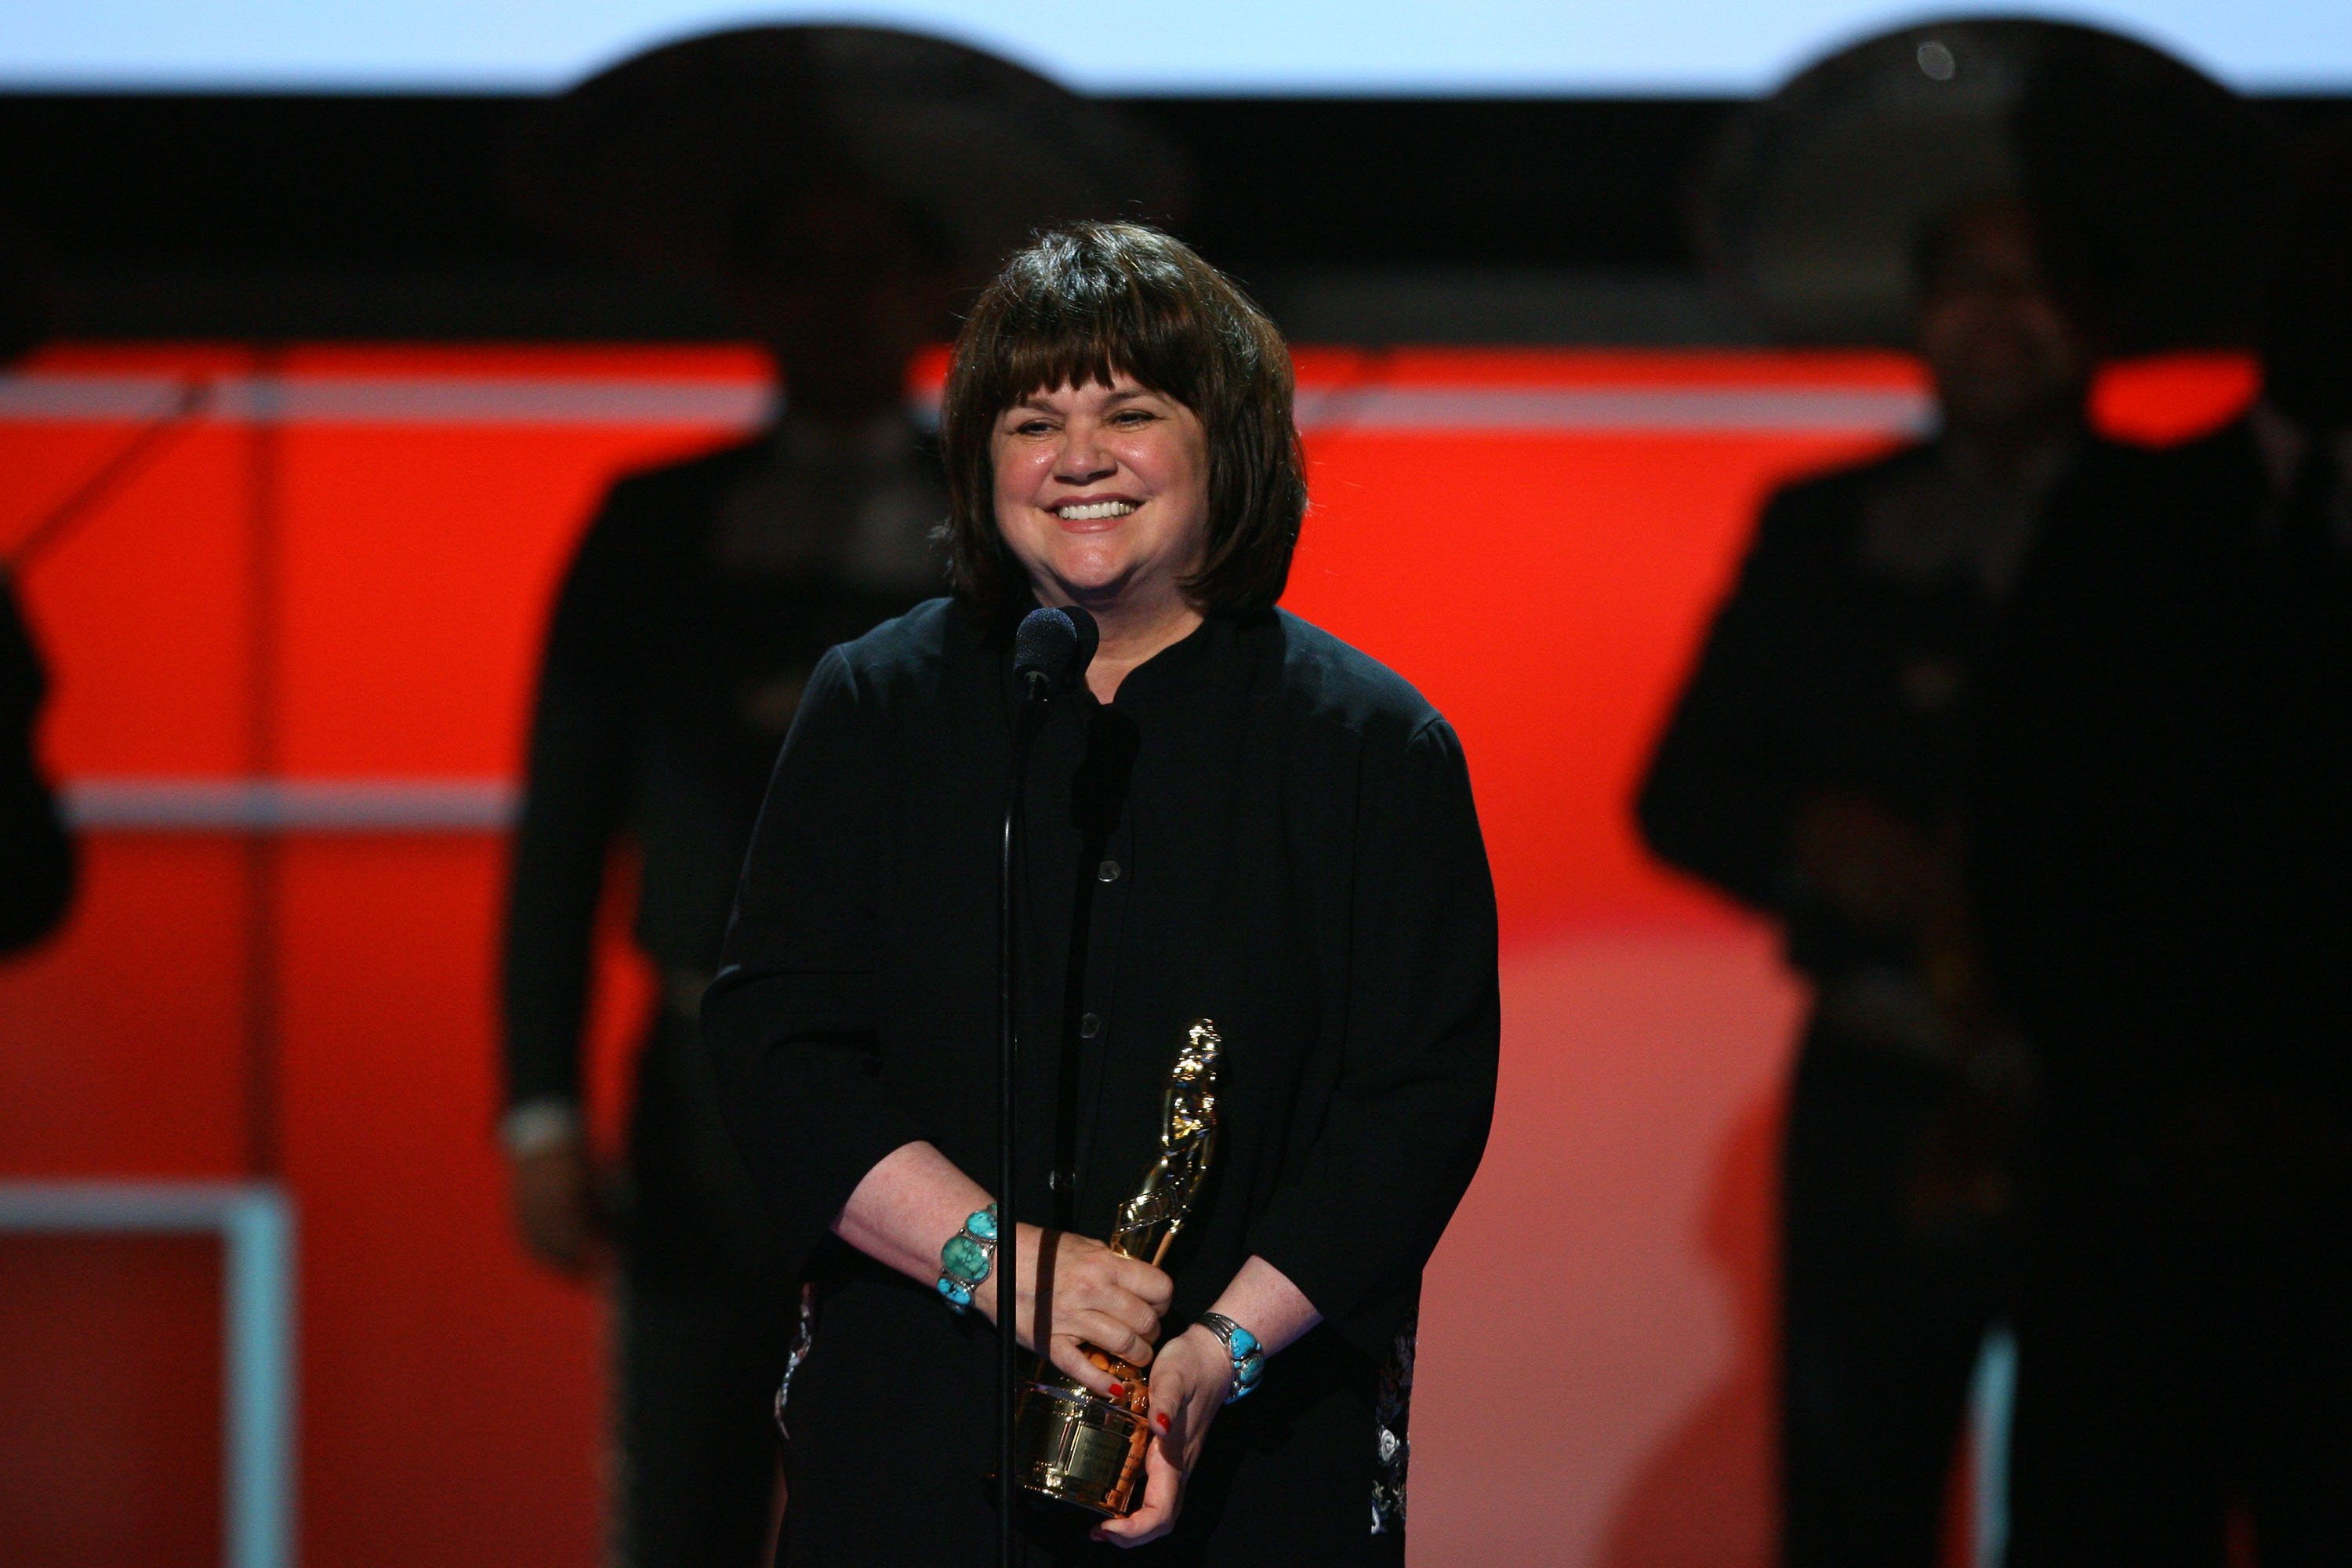 Linda Ronstadt during the ALMA Awards at the Pasadena Civic Auditorium on August 17, 2008, in Pasadena, California | Source: Getty Images